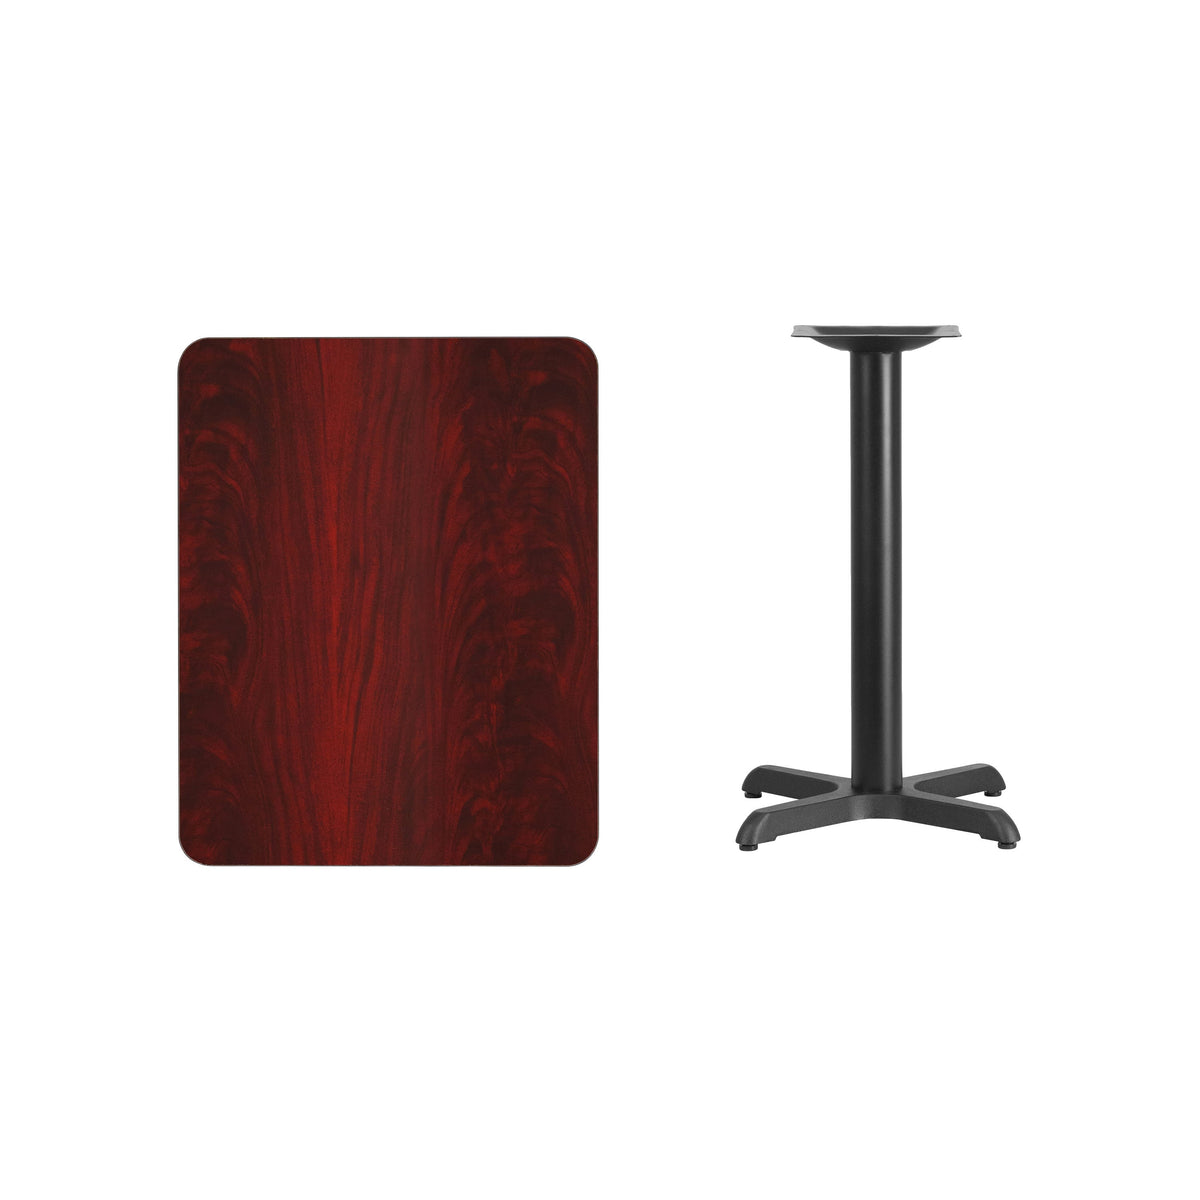 Mahogany |#| 24inch x 30inch Mahogany Laminate Table Top with 22inch x 22inch Table Height Base